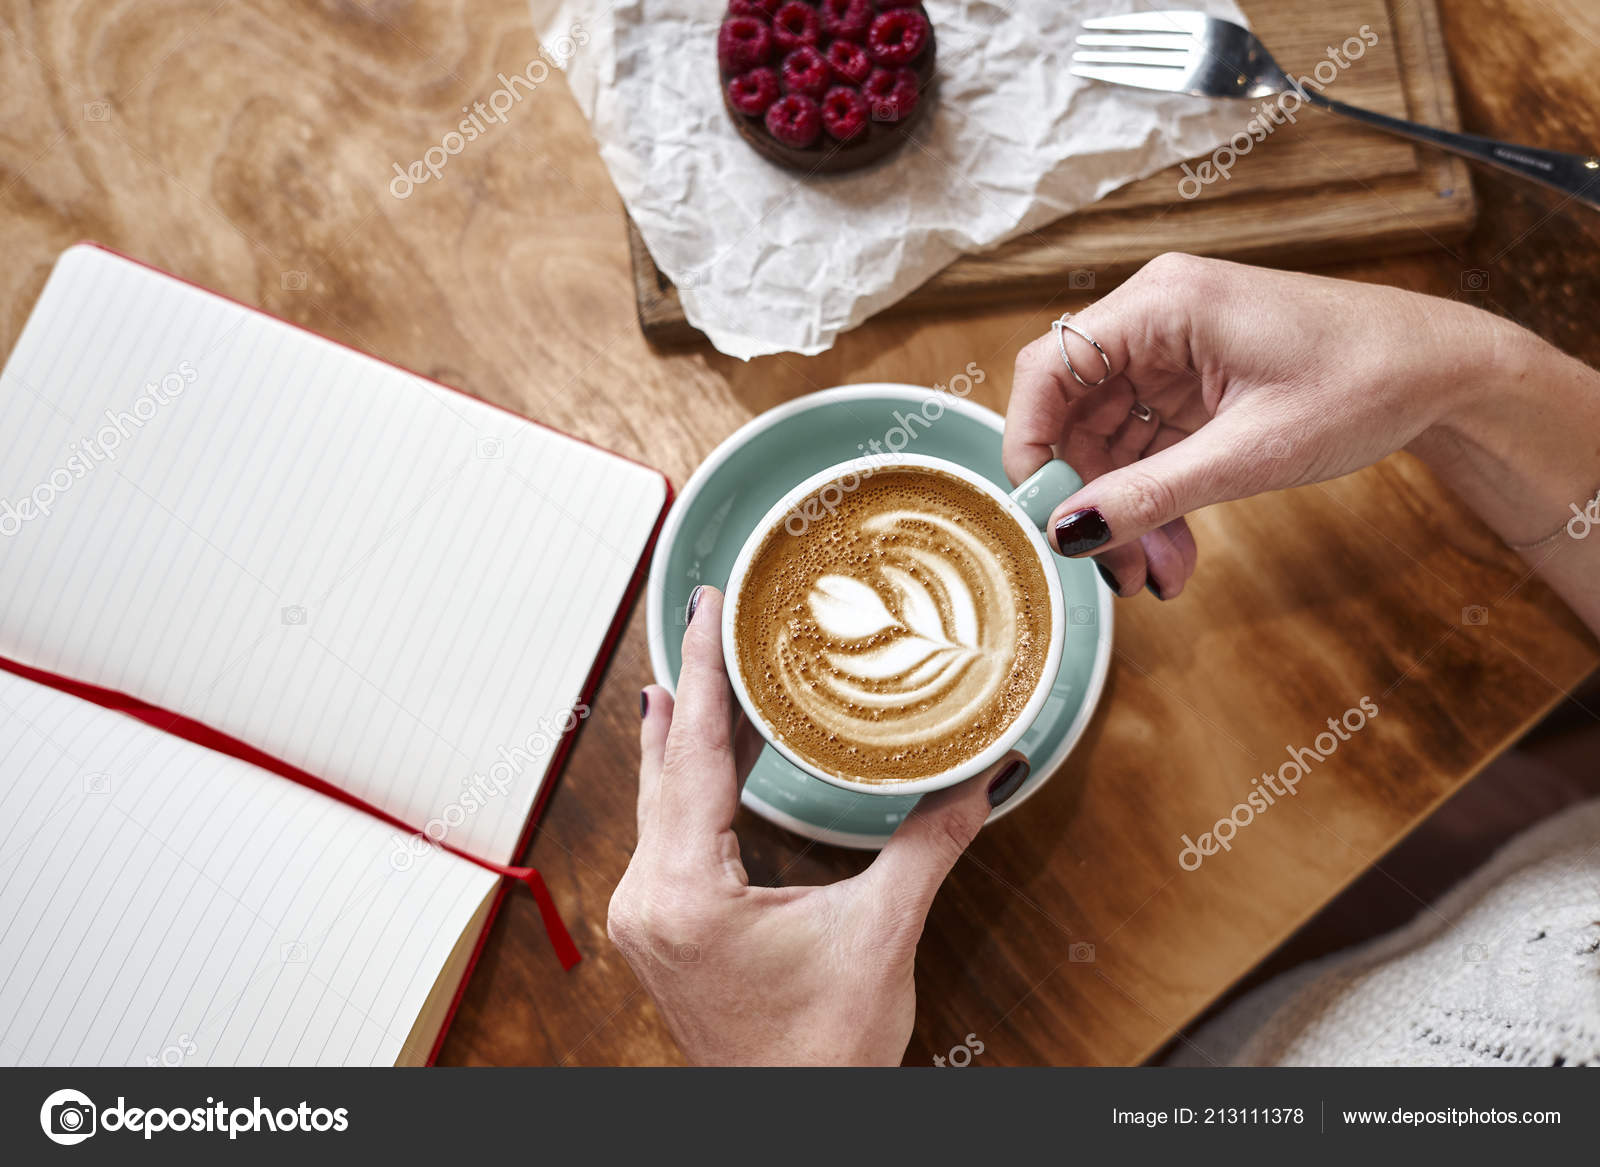 Cup Coffee Latte Wooden Table Background Woman Hands Having Lunch Stock Photo C Pogorelova 213111378